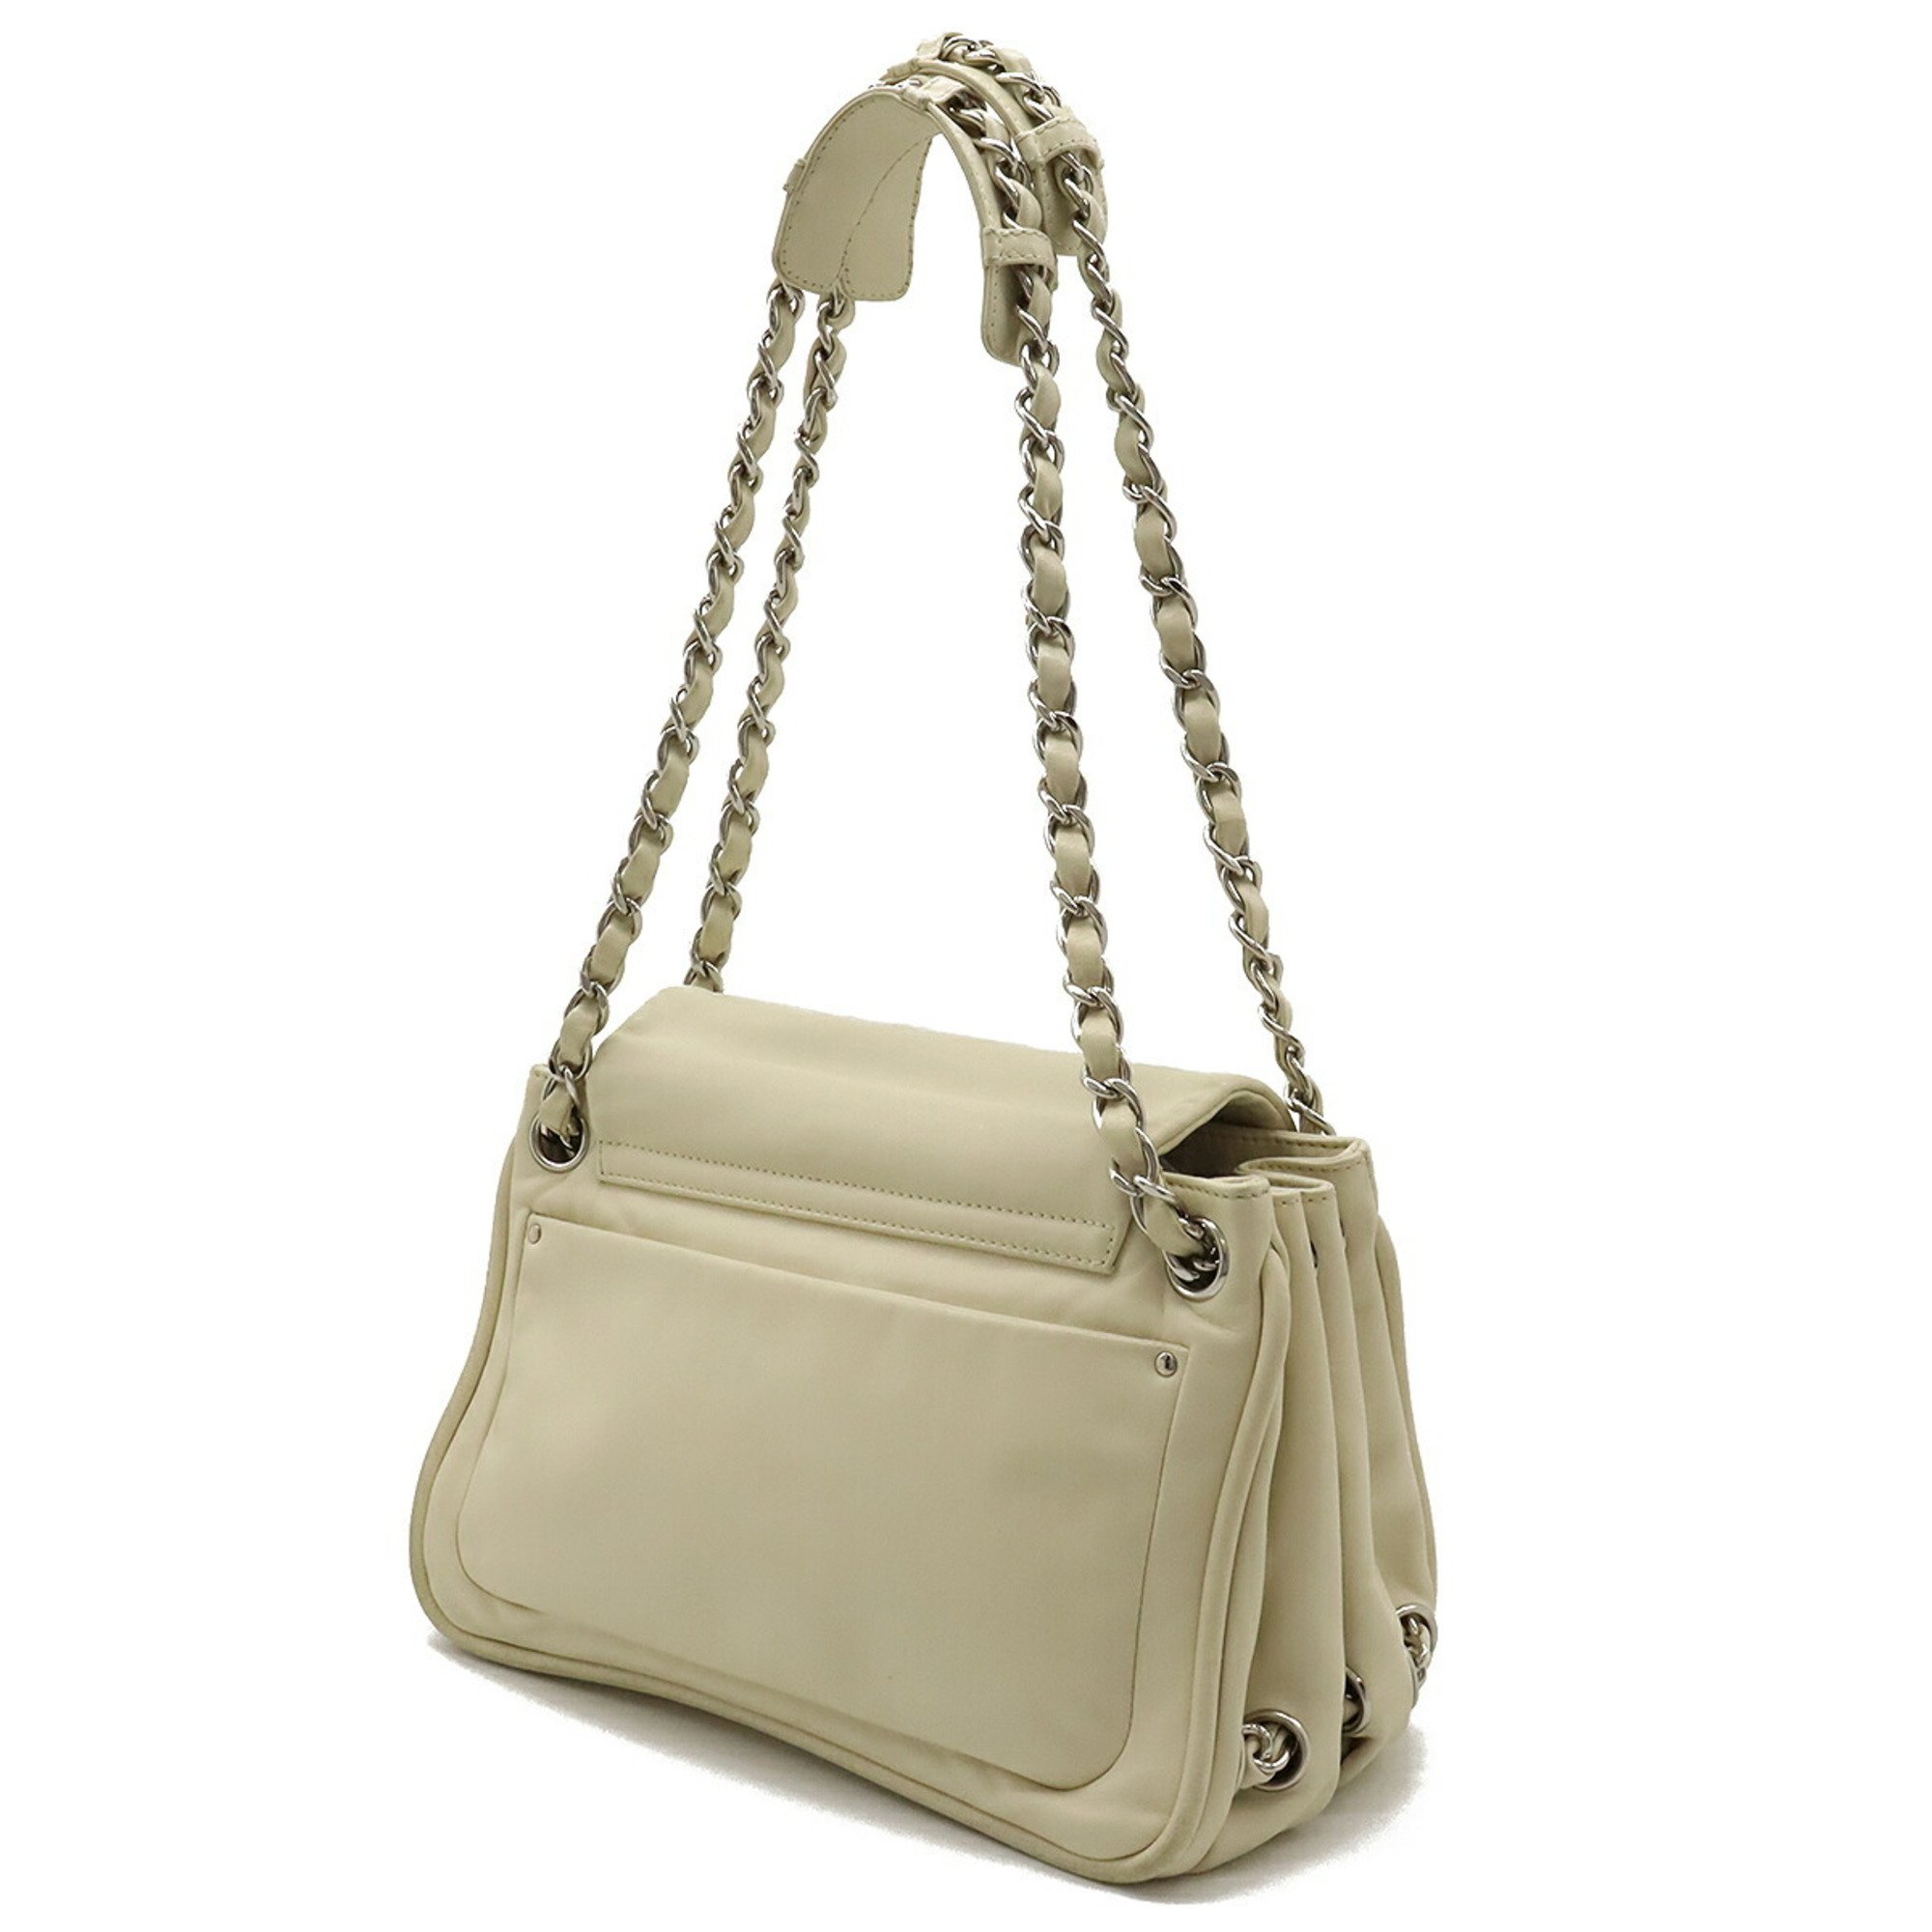 CHANEL Coco Mark Shoulder Bag Tote Chain Leather Ivory